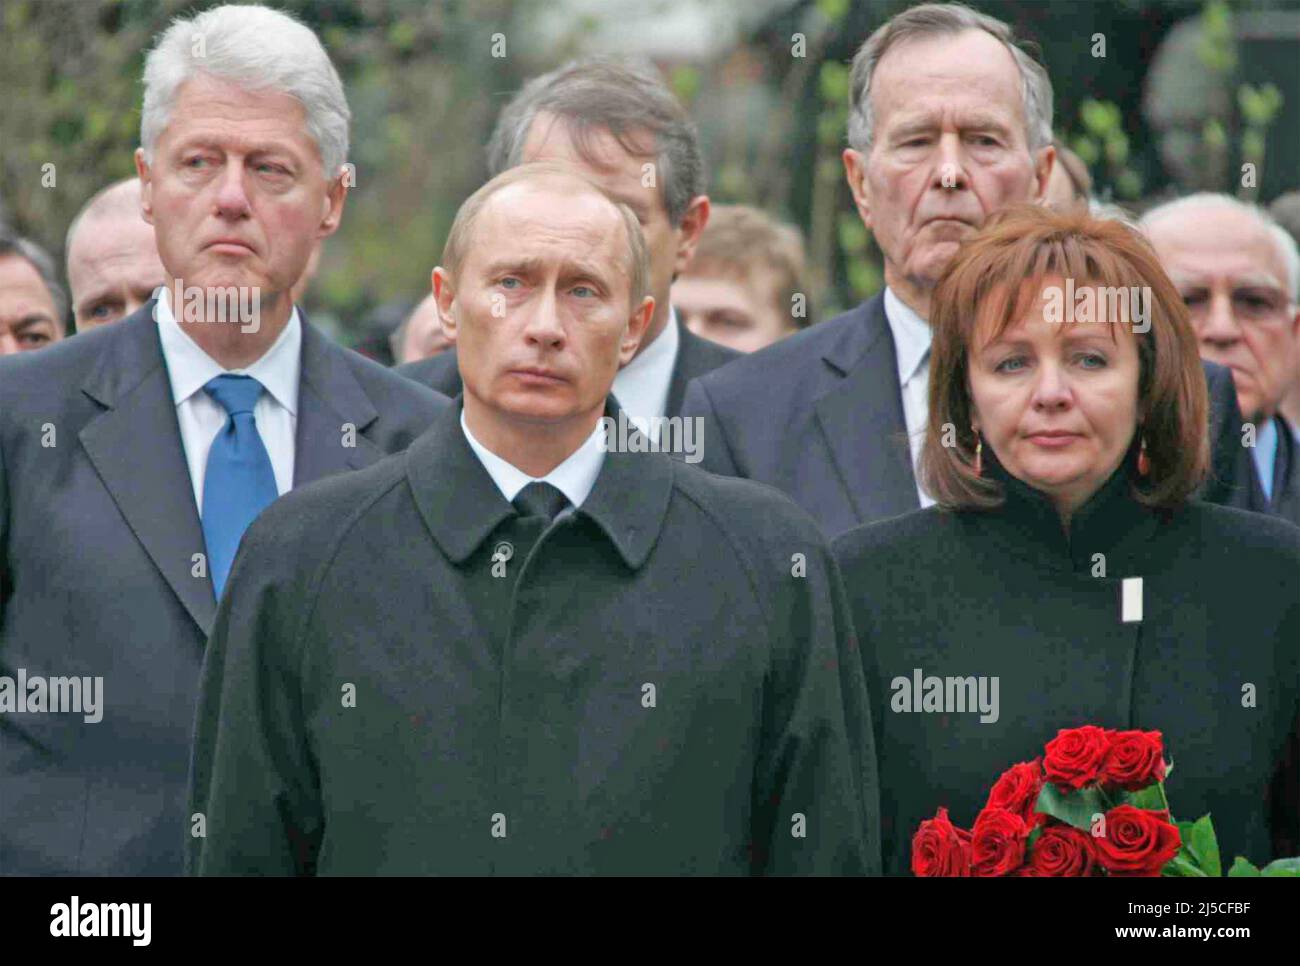 VLADIMIR PUTIN, Russian President, at the state funeral of Boris Yeltsin in Moscow, April 2007 with his wife Lyudmila, Bill Clinton and George W. Bush Stock Photo